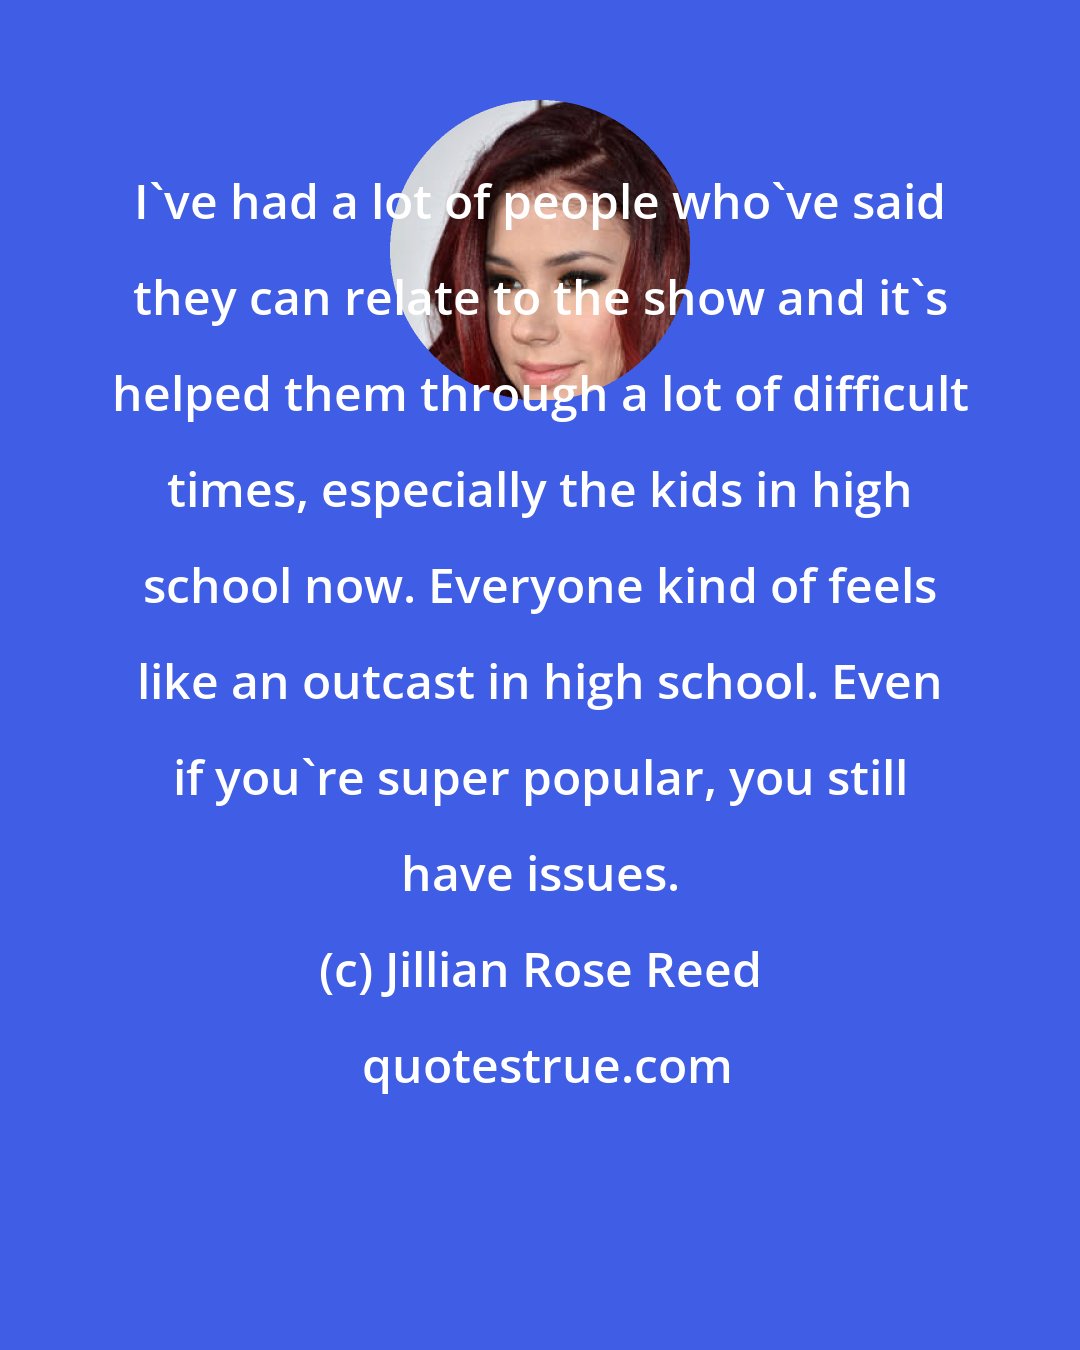 Jillian Rose Reed: I've had a lot of people who've said they can relate to the show and it's helped them through a lot of difficult times, especially the kids in high school now. Everyone kind of feels like an outcast in high school. Even if you're super popular, you still have issues.